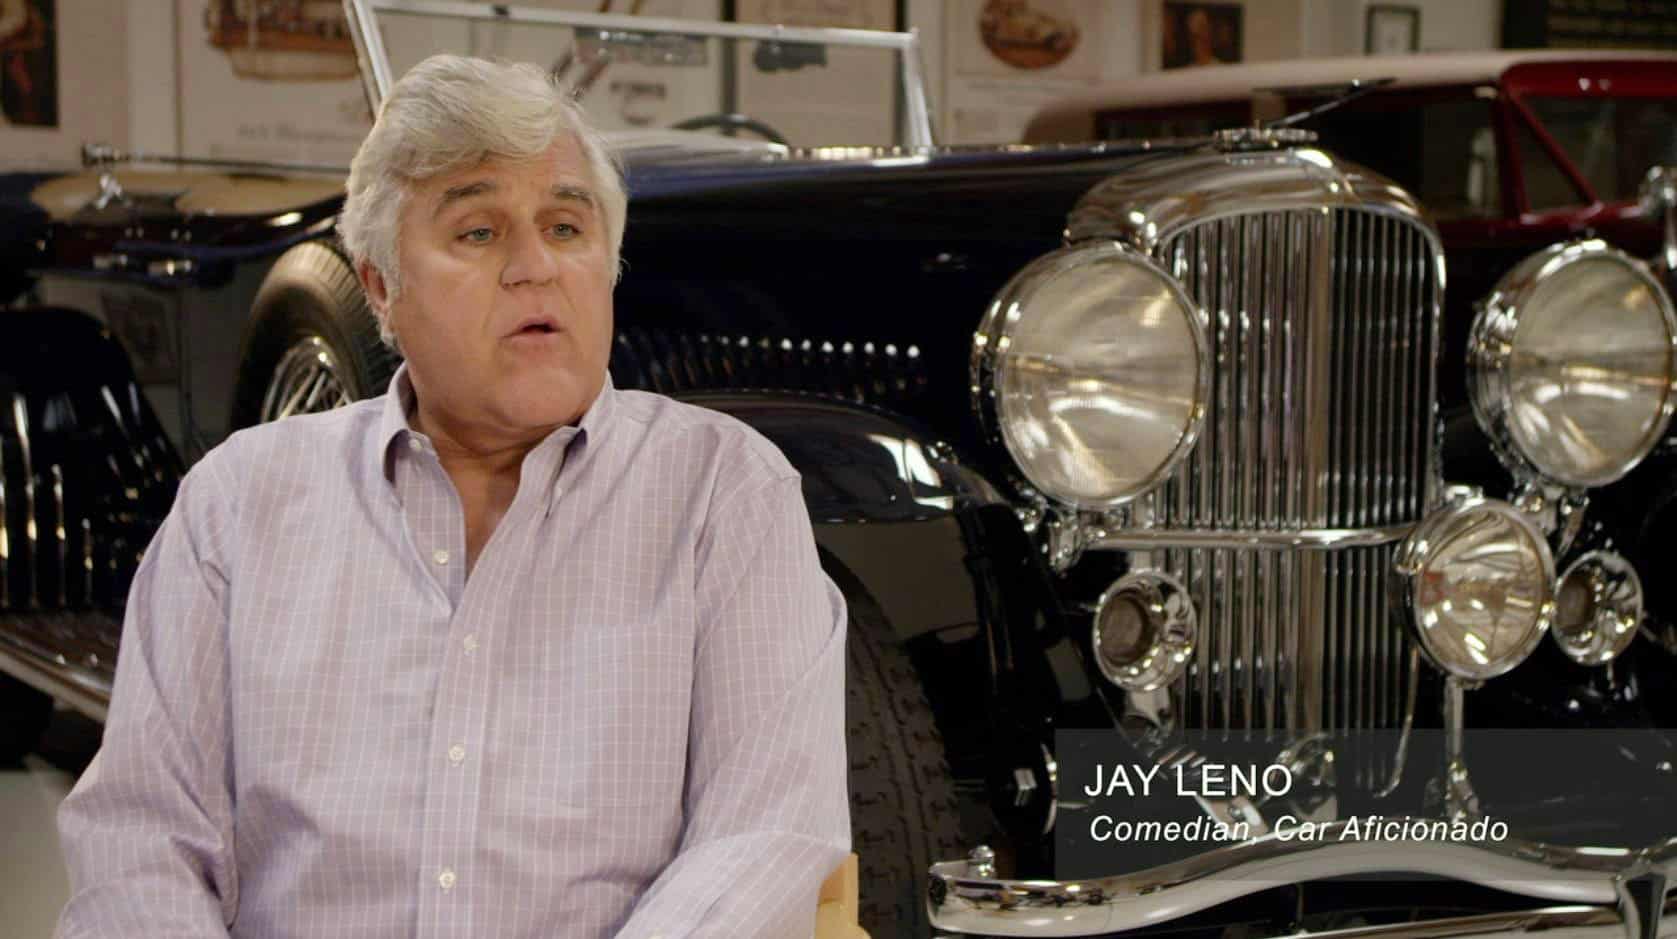 LIVE ANOTHER DAY, Jay Leno, 2016